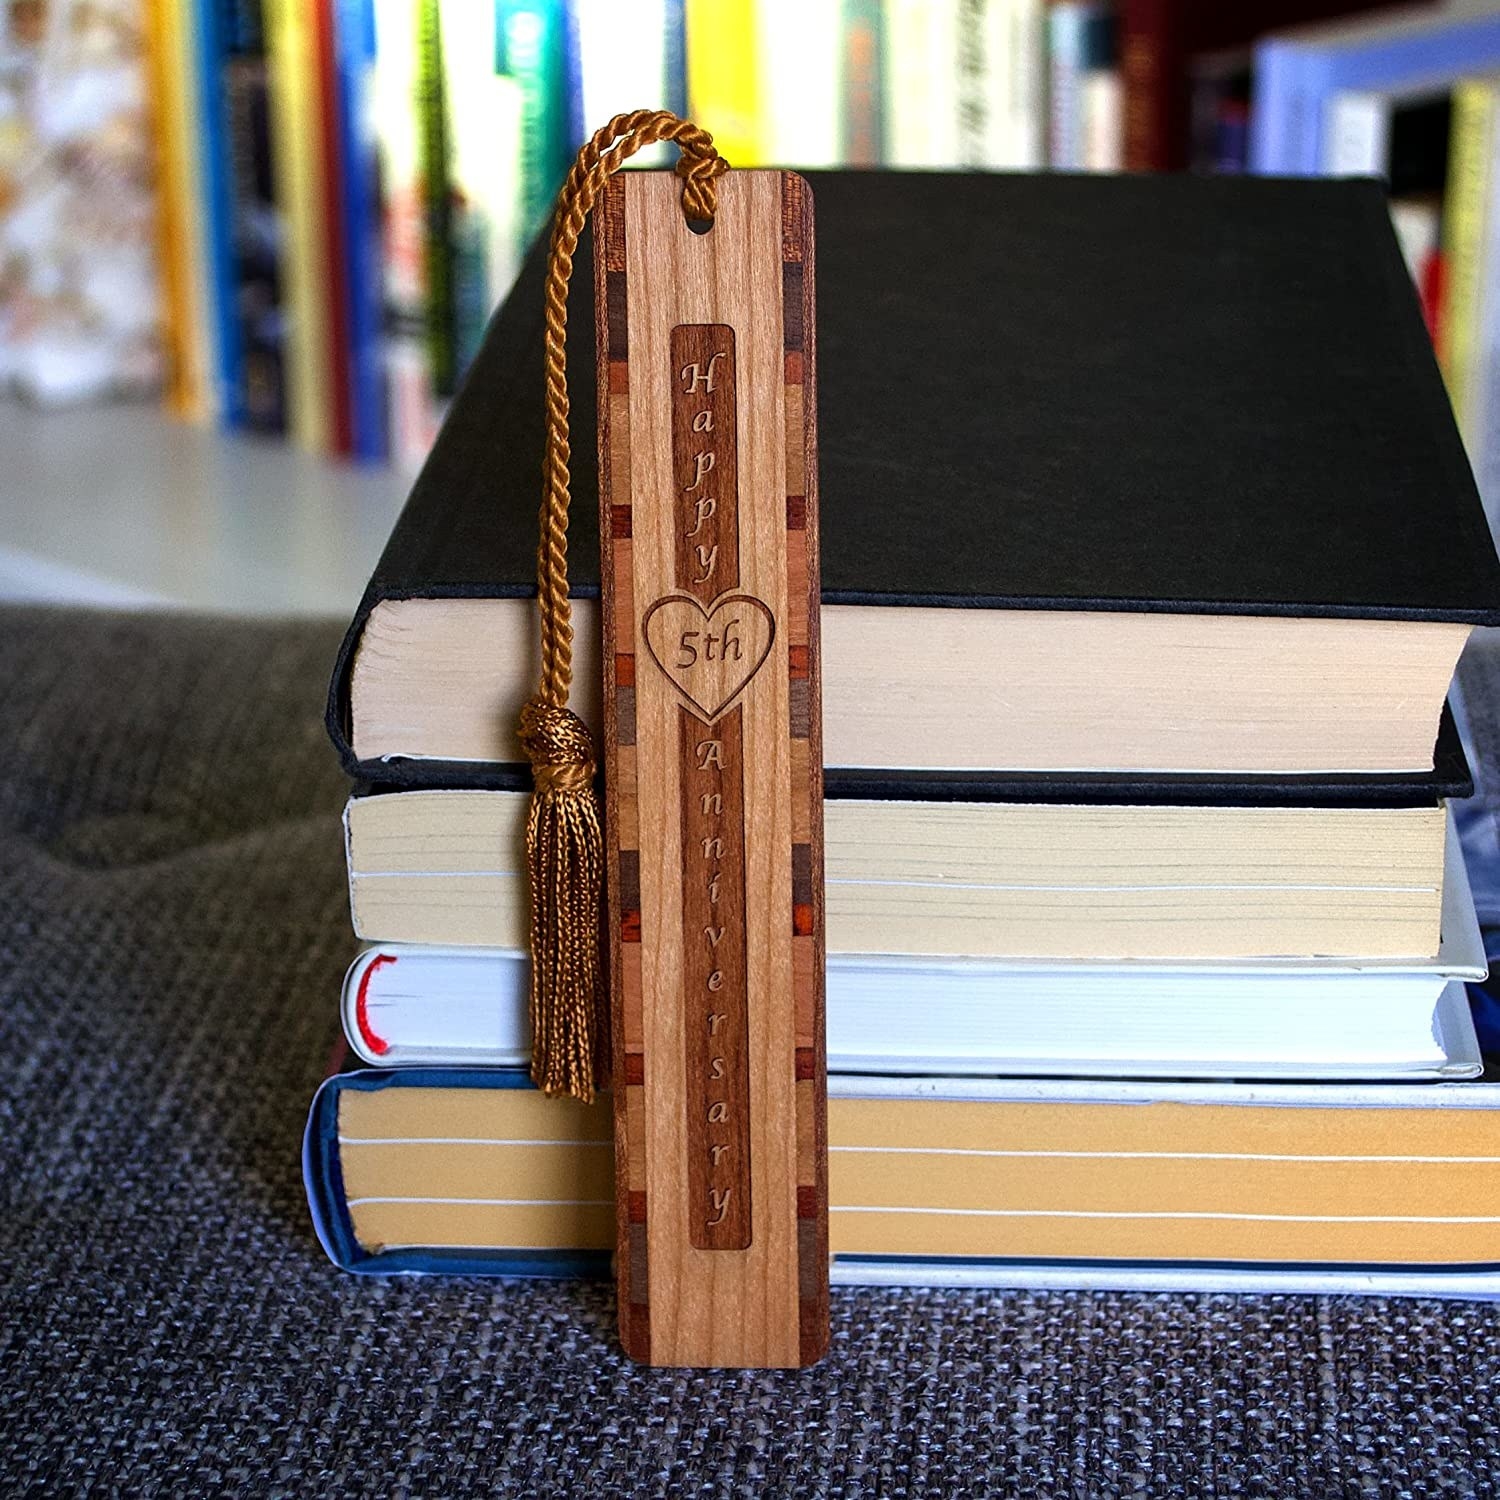 Image of the bookmark next to a stack of books